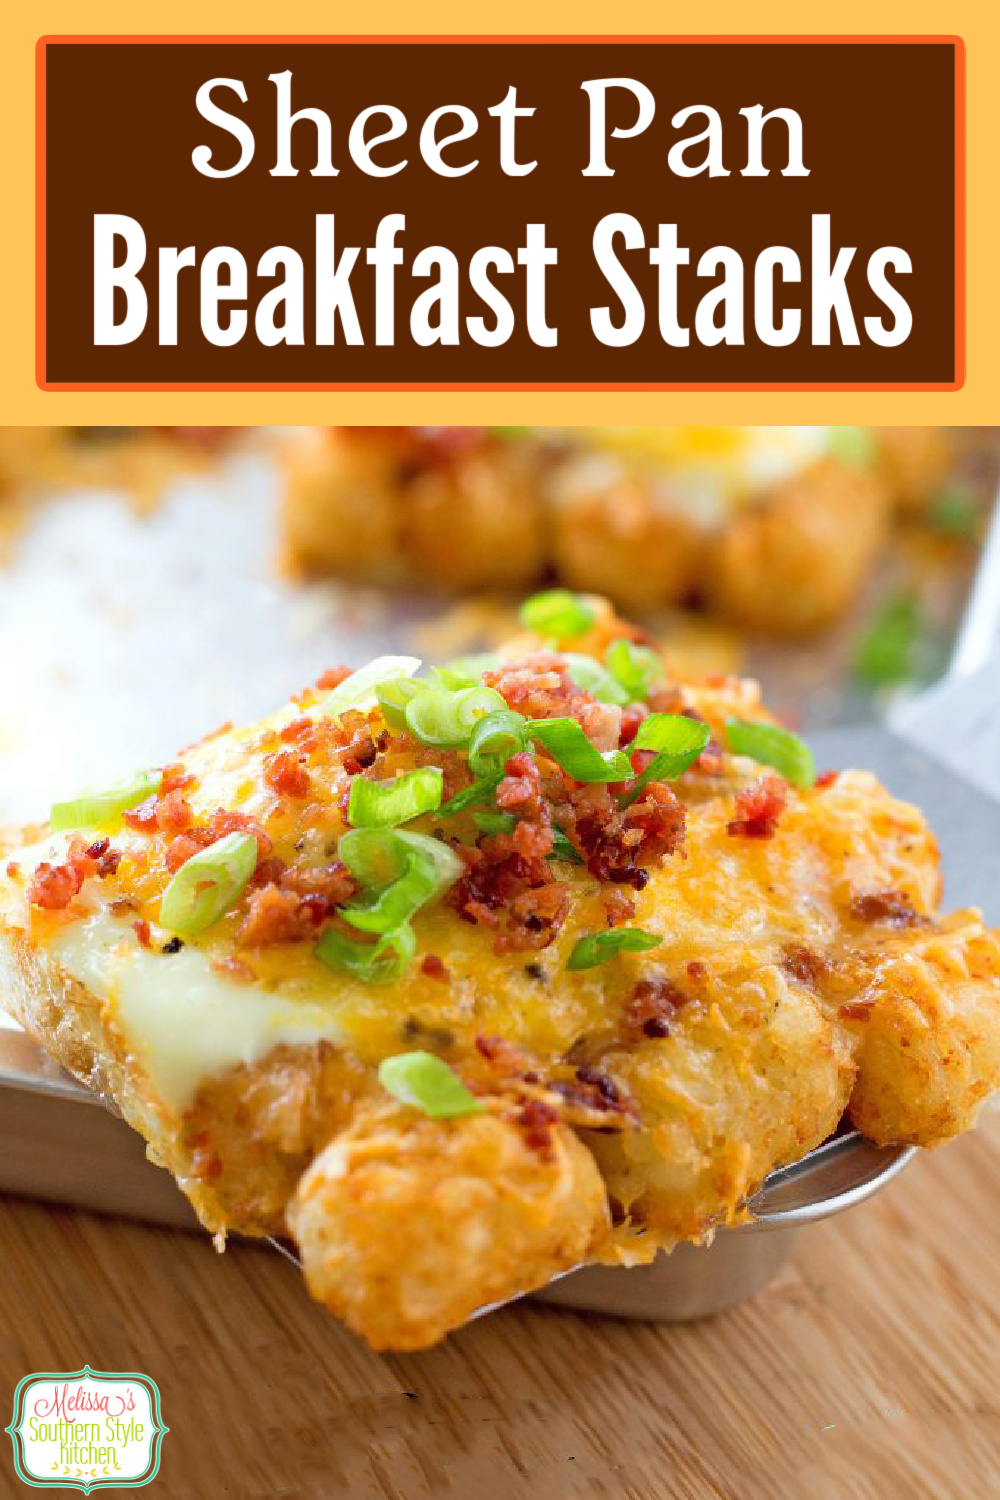 You can personalize each one of these breakfast stacks and bake them all at the same time with your favorite toppings #tatertots #breakfaststacks #brunch #eggs #holidayrecipes #holidaybrunch #baconandeggs #bacon #easyrecipes #dinnerideas #southernfood #southernrecipes #sheetpanmeals #sheetpanbreakfaststacks via @melissasssk